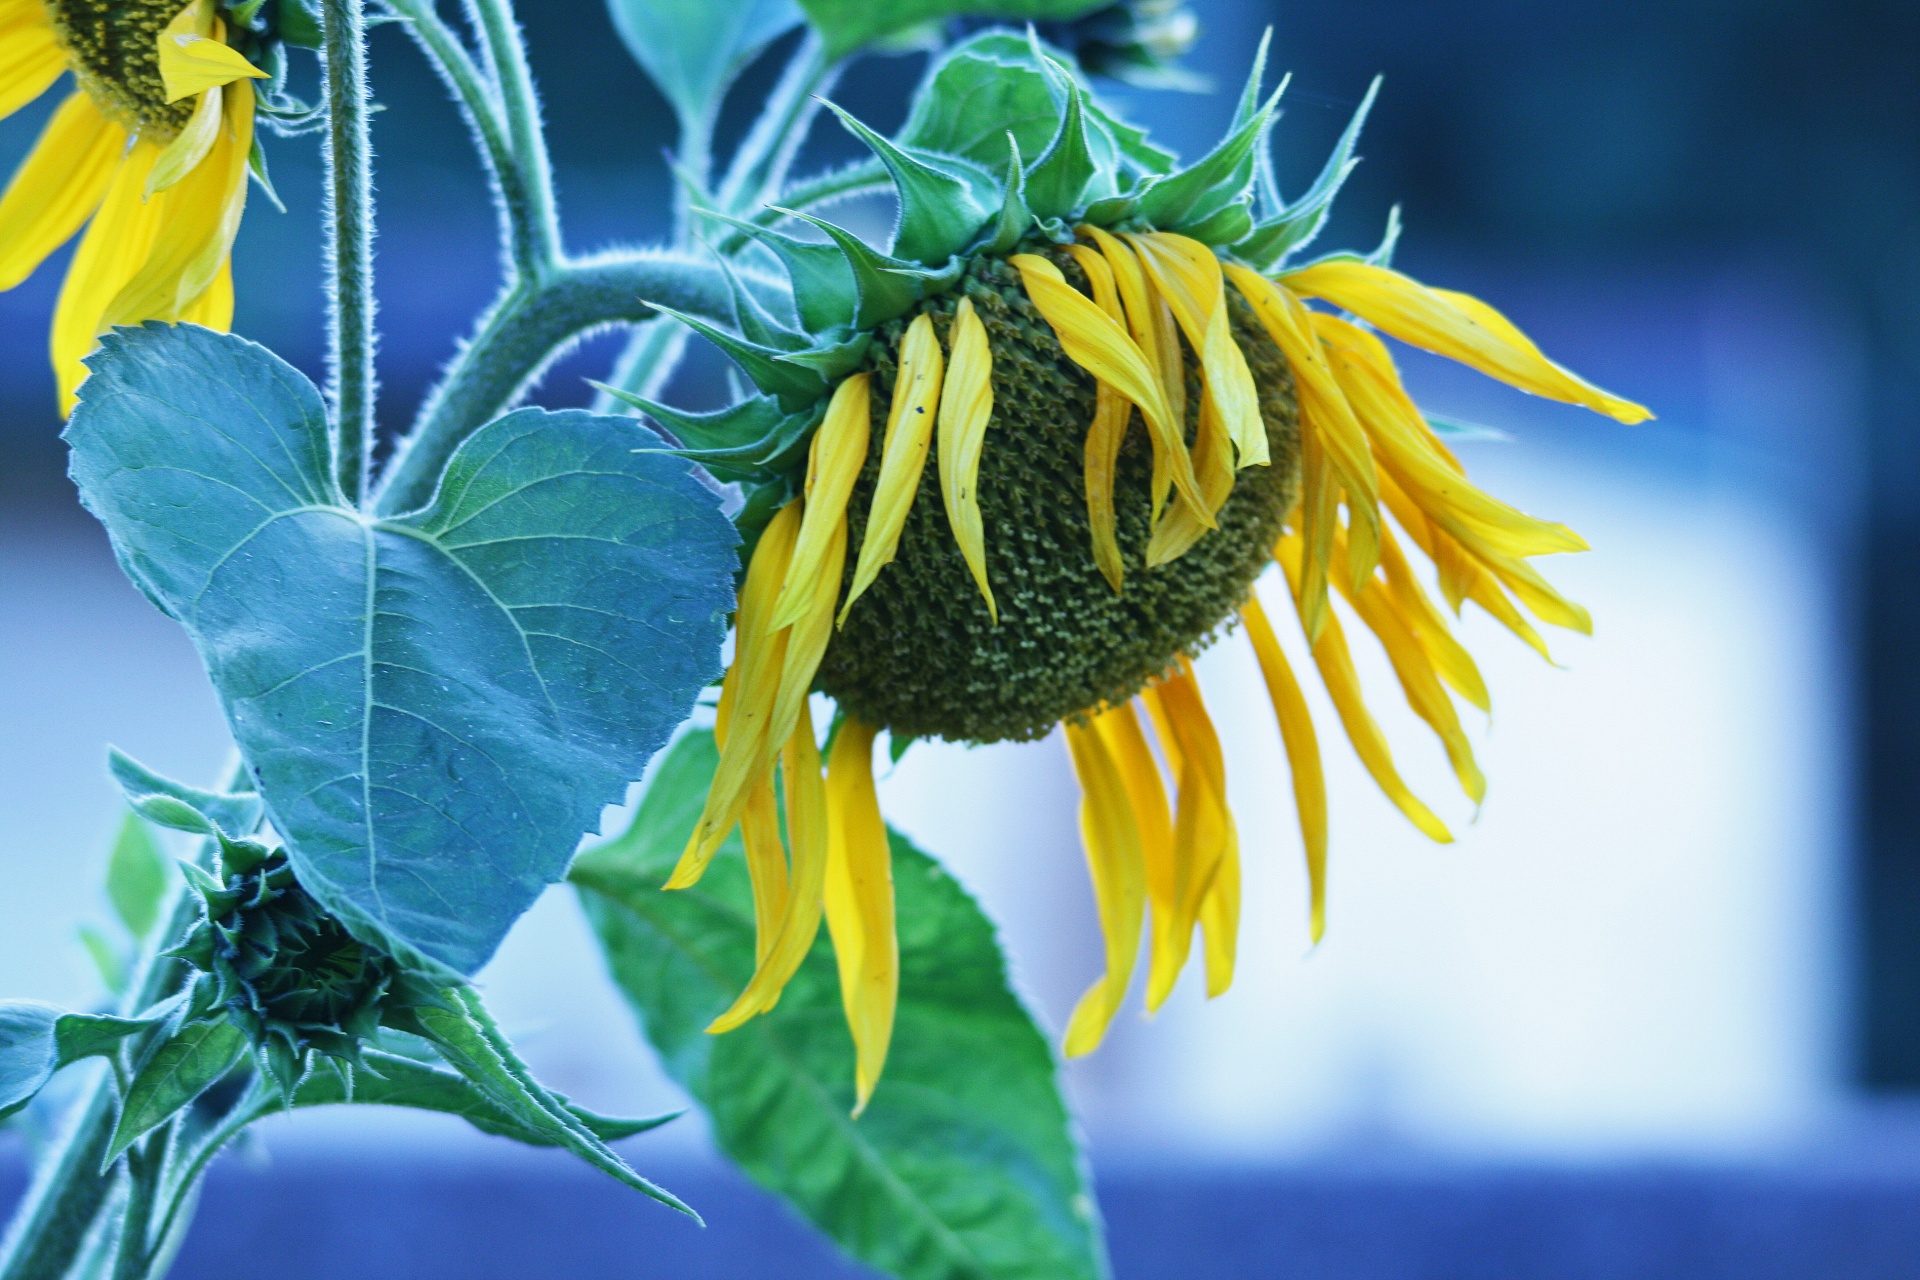 Large Yellow Sunflower Drooping